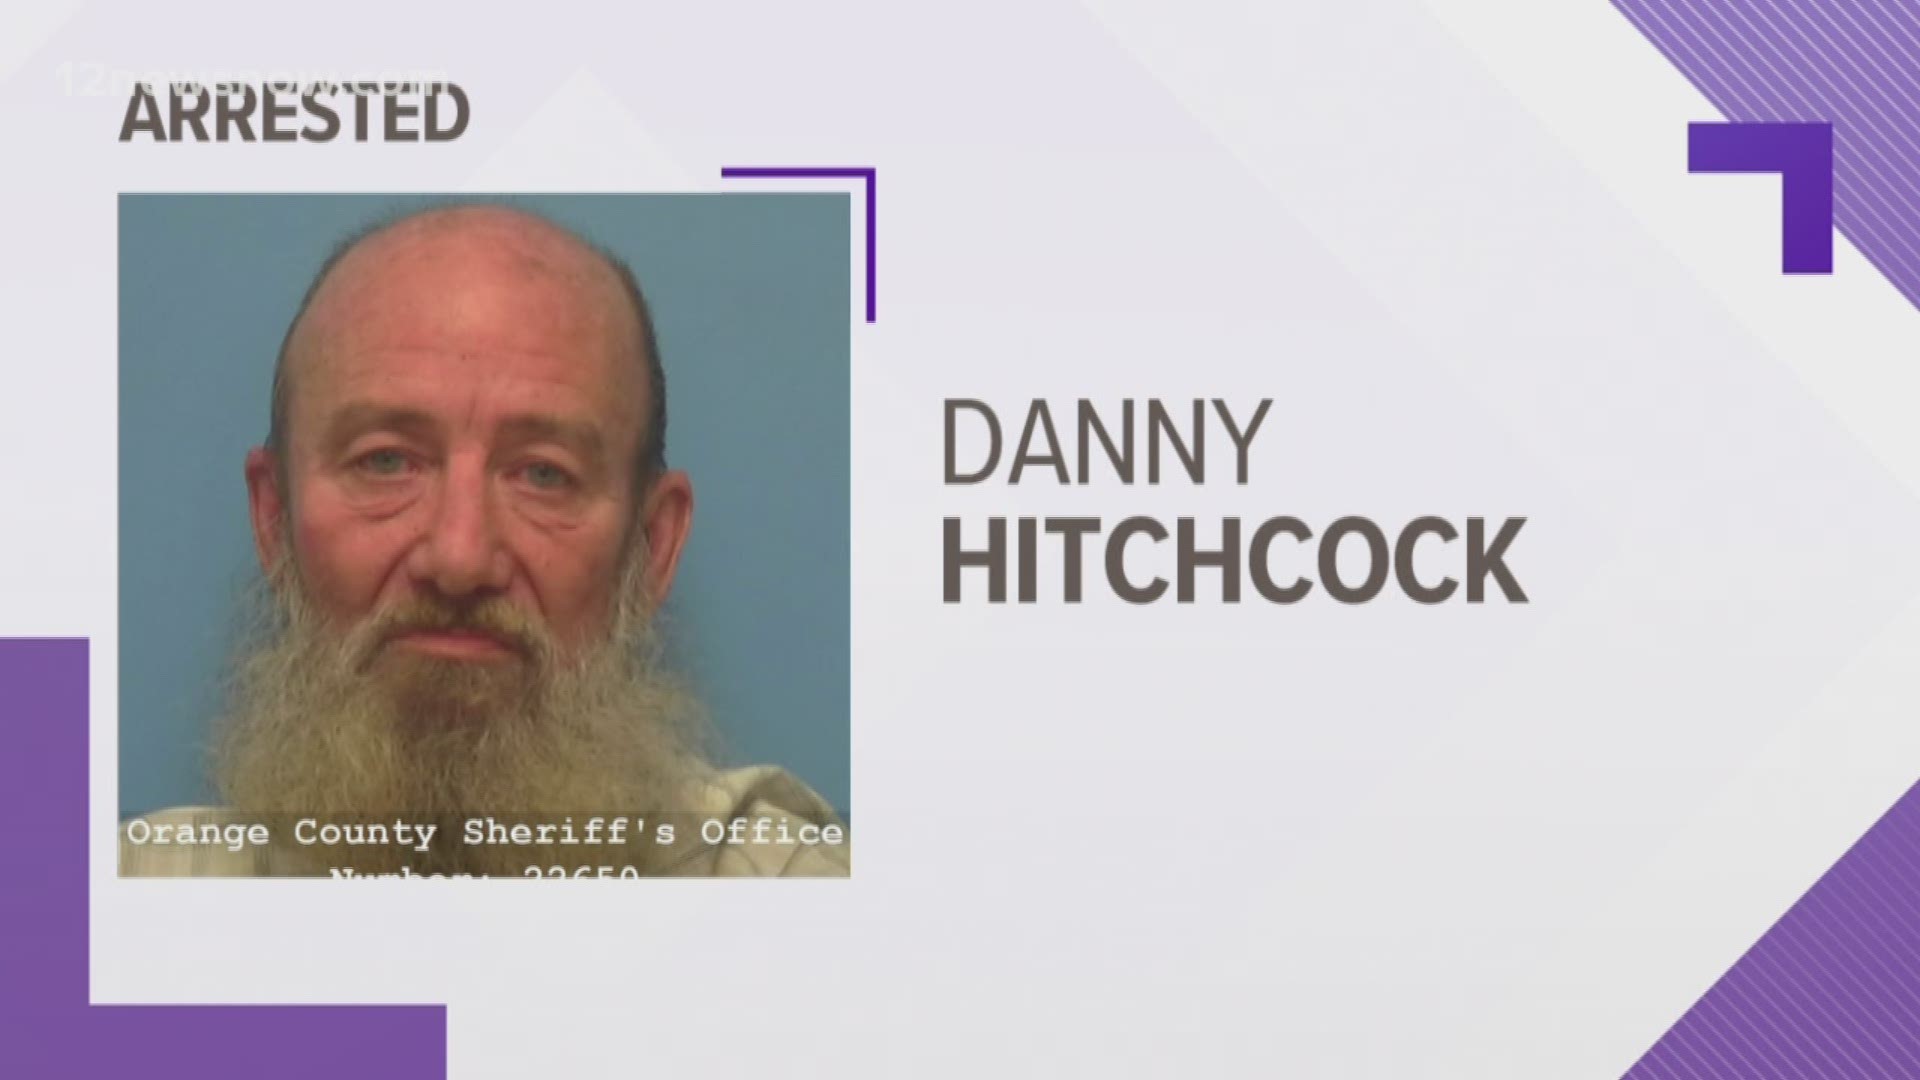 Danny Hitchcock was arrested and charged